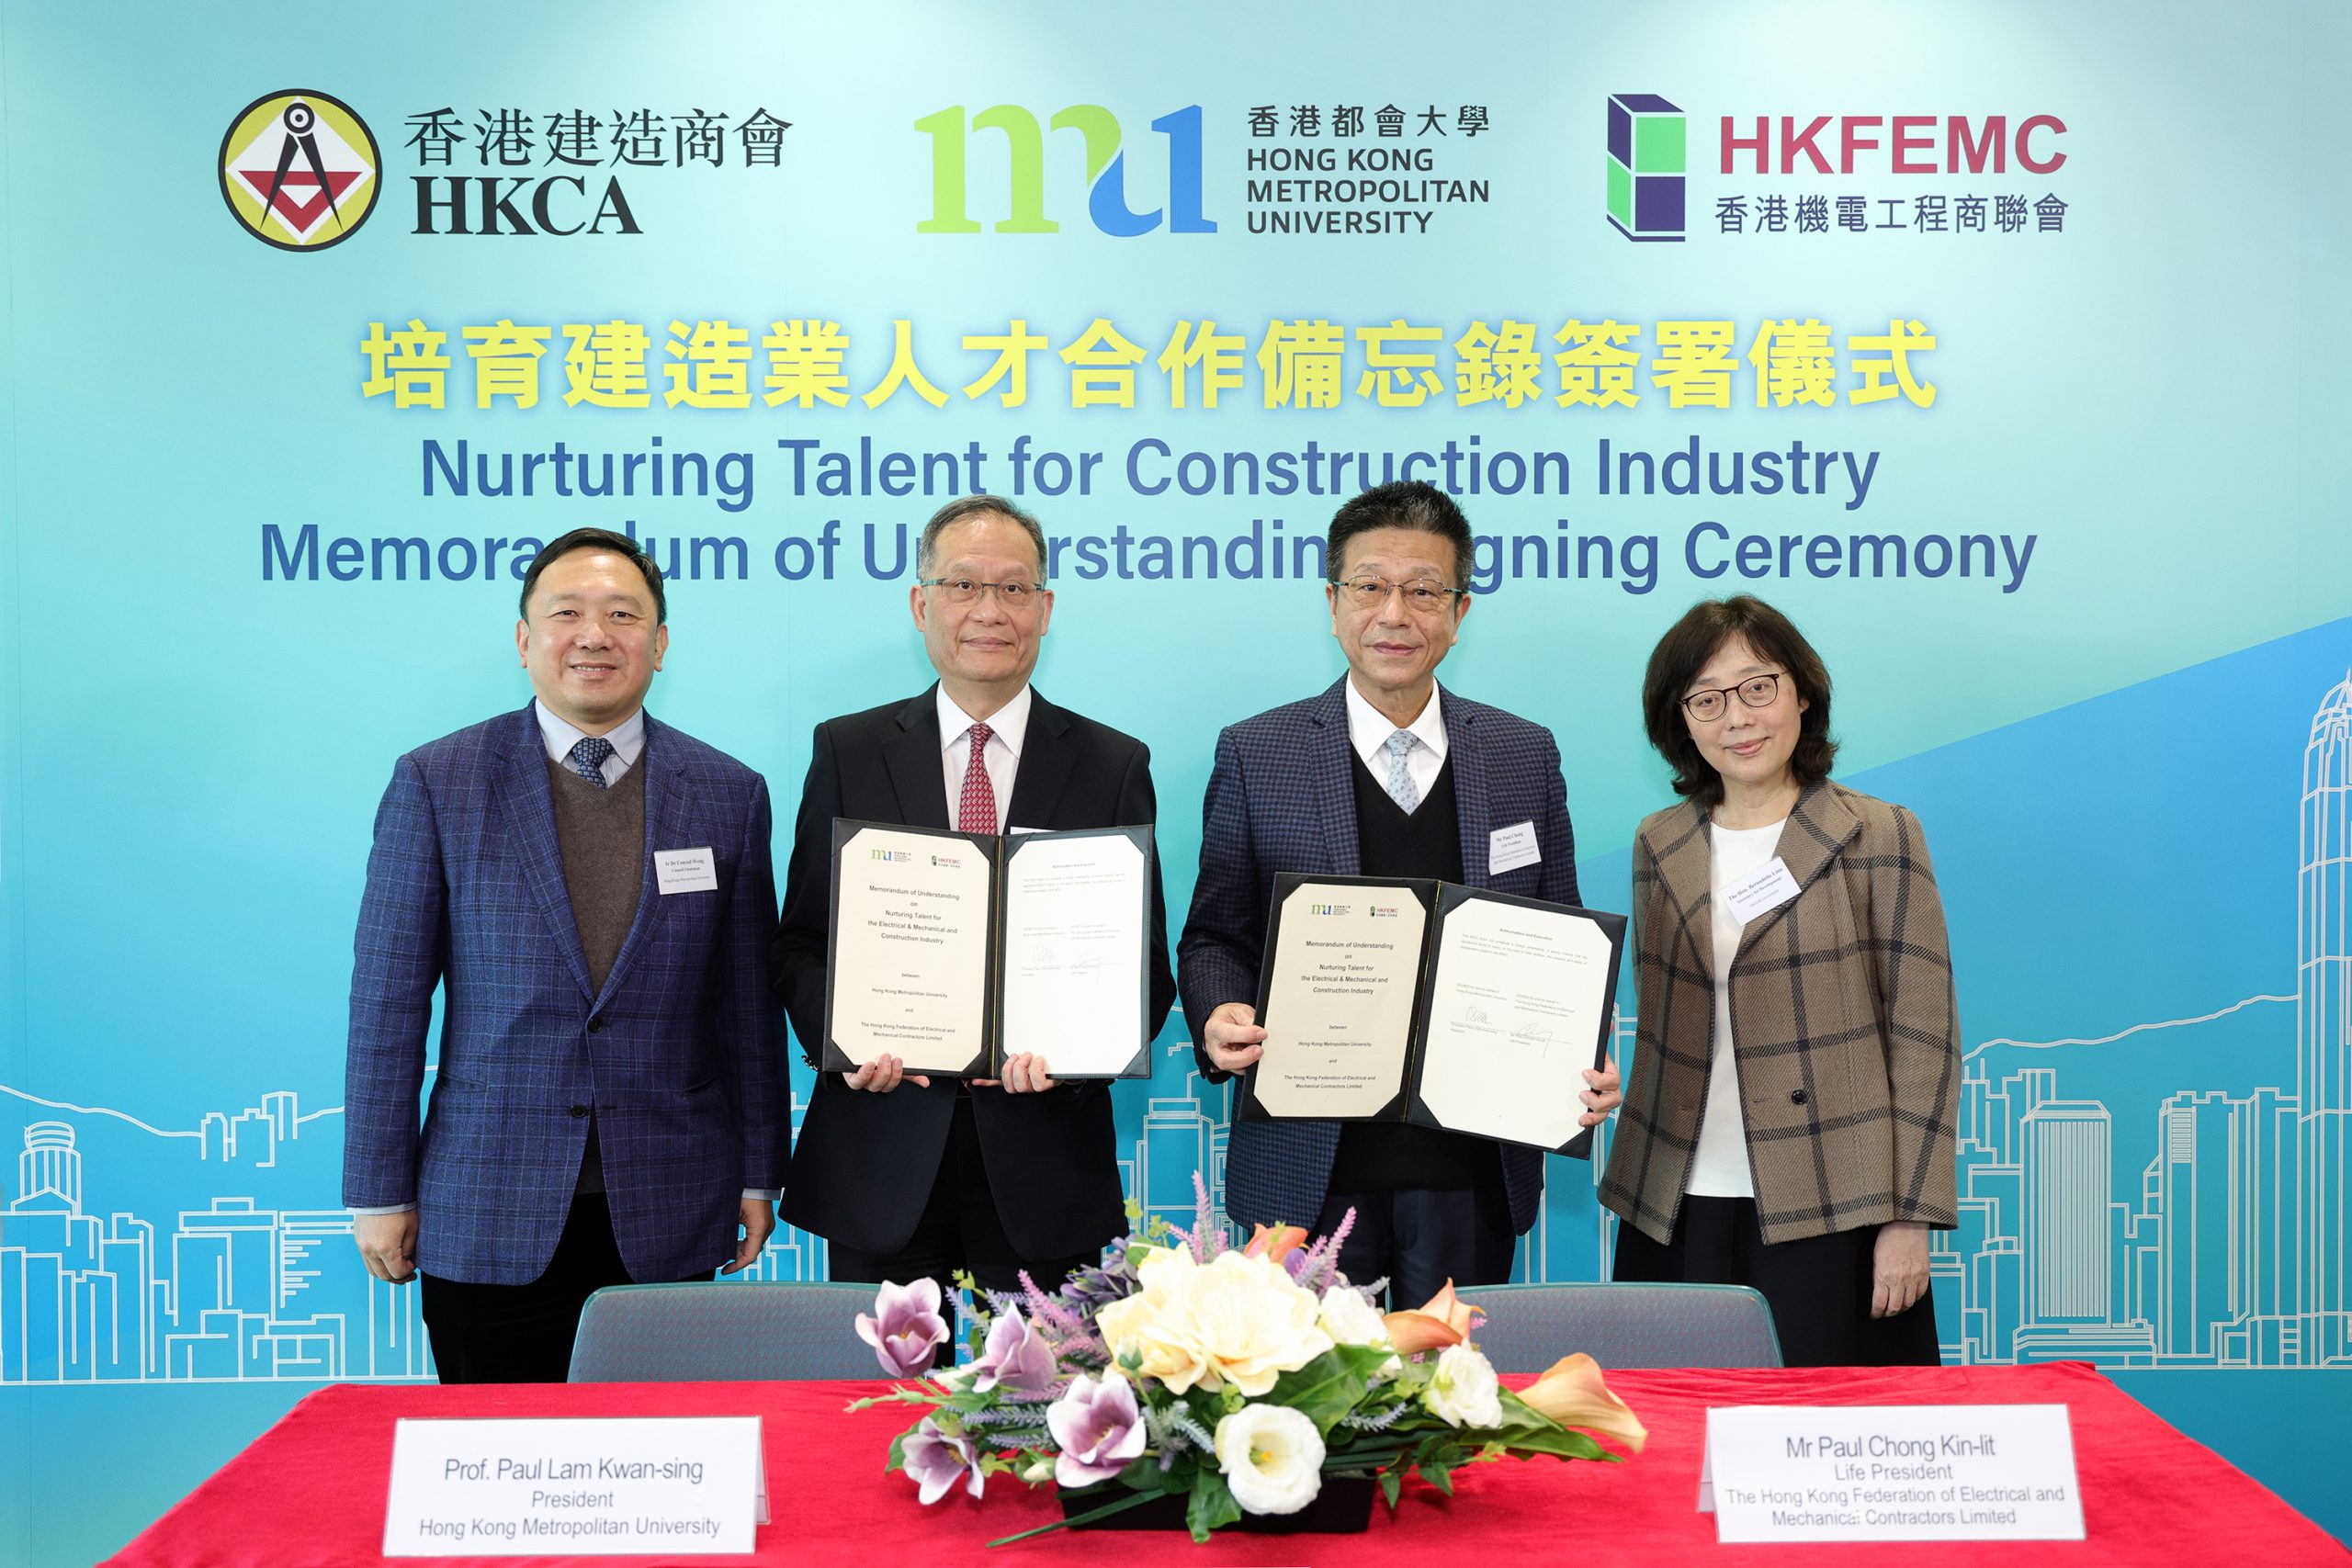 The MOU is signed by HKMU President Prof. Paul Lam Kwan-sing (second from left), and HKFEMC Life President Mr Paul Chong Kin-lit (second from right).	